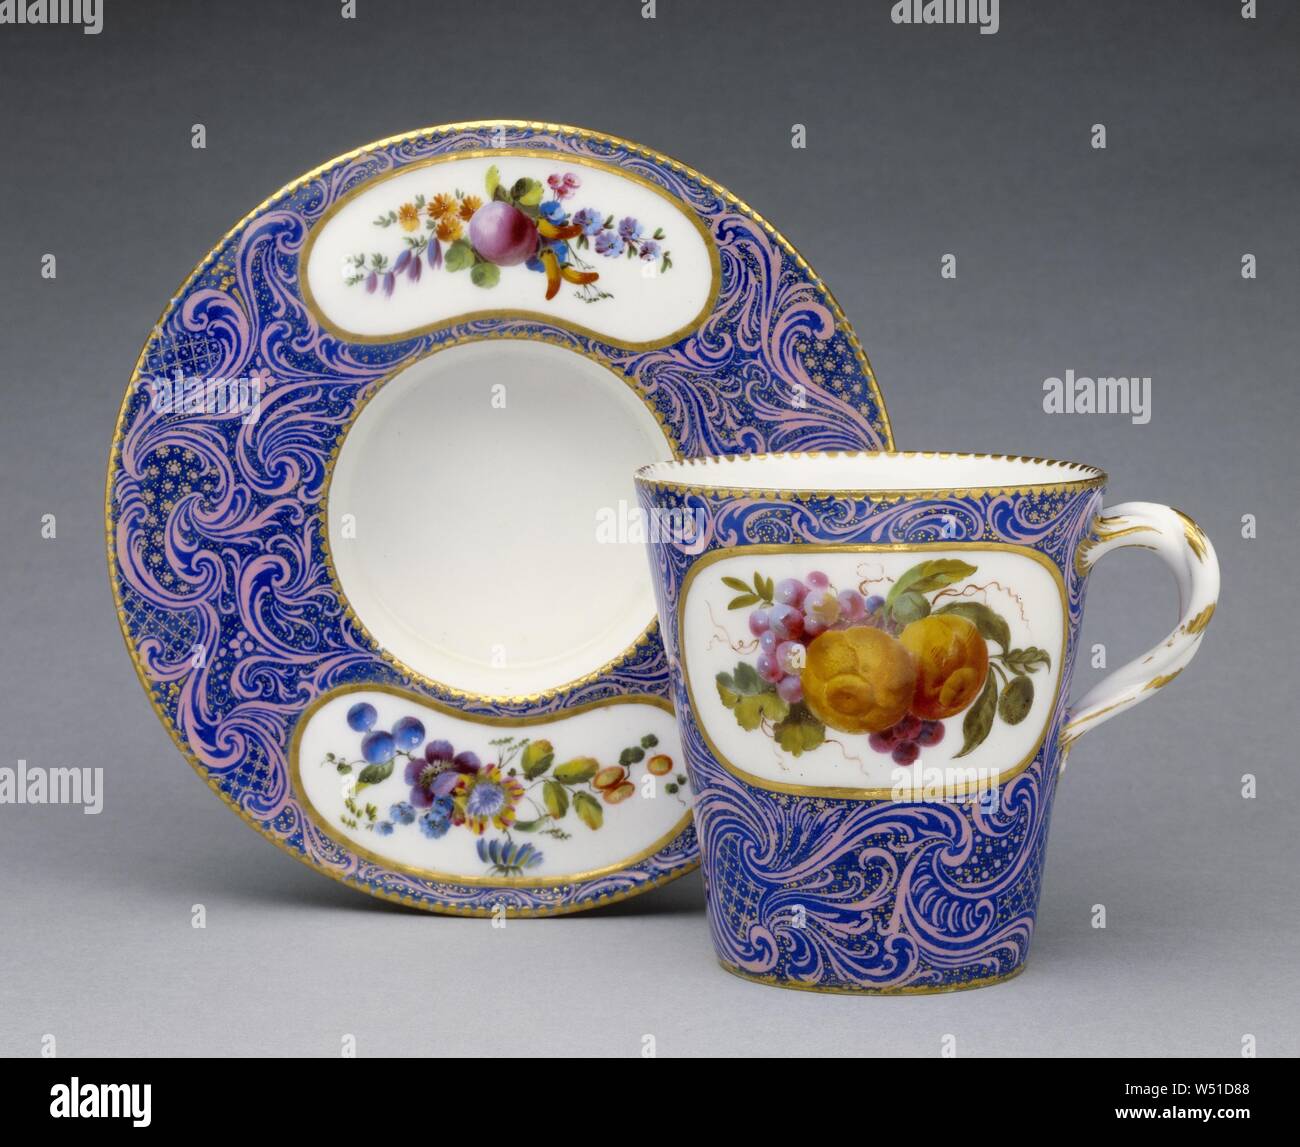 Cup and Saucer, Sèvres Manufactory (French, 1756 - present), 1761, Soft-paste porcelain, pink ground color overlaid with blue enamel, colored enamel decoration and gilding, 9 x 10.6 x 8.6 cm (3 9/16 x 4 3/16 x 3 3/8 in Stock Photo